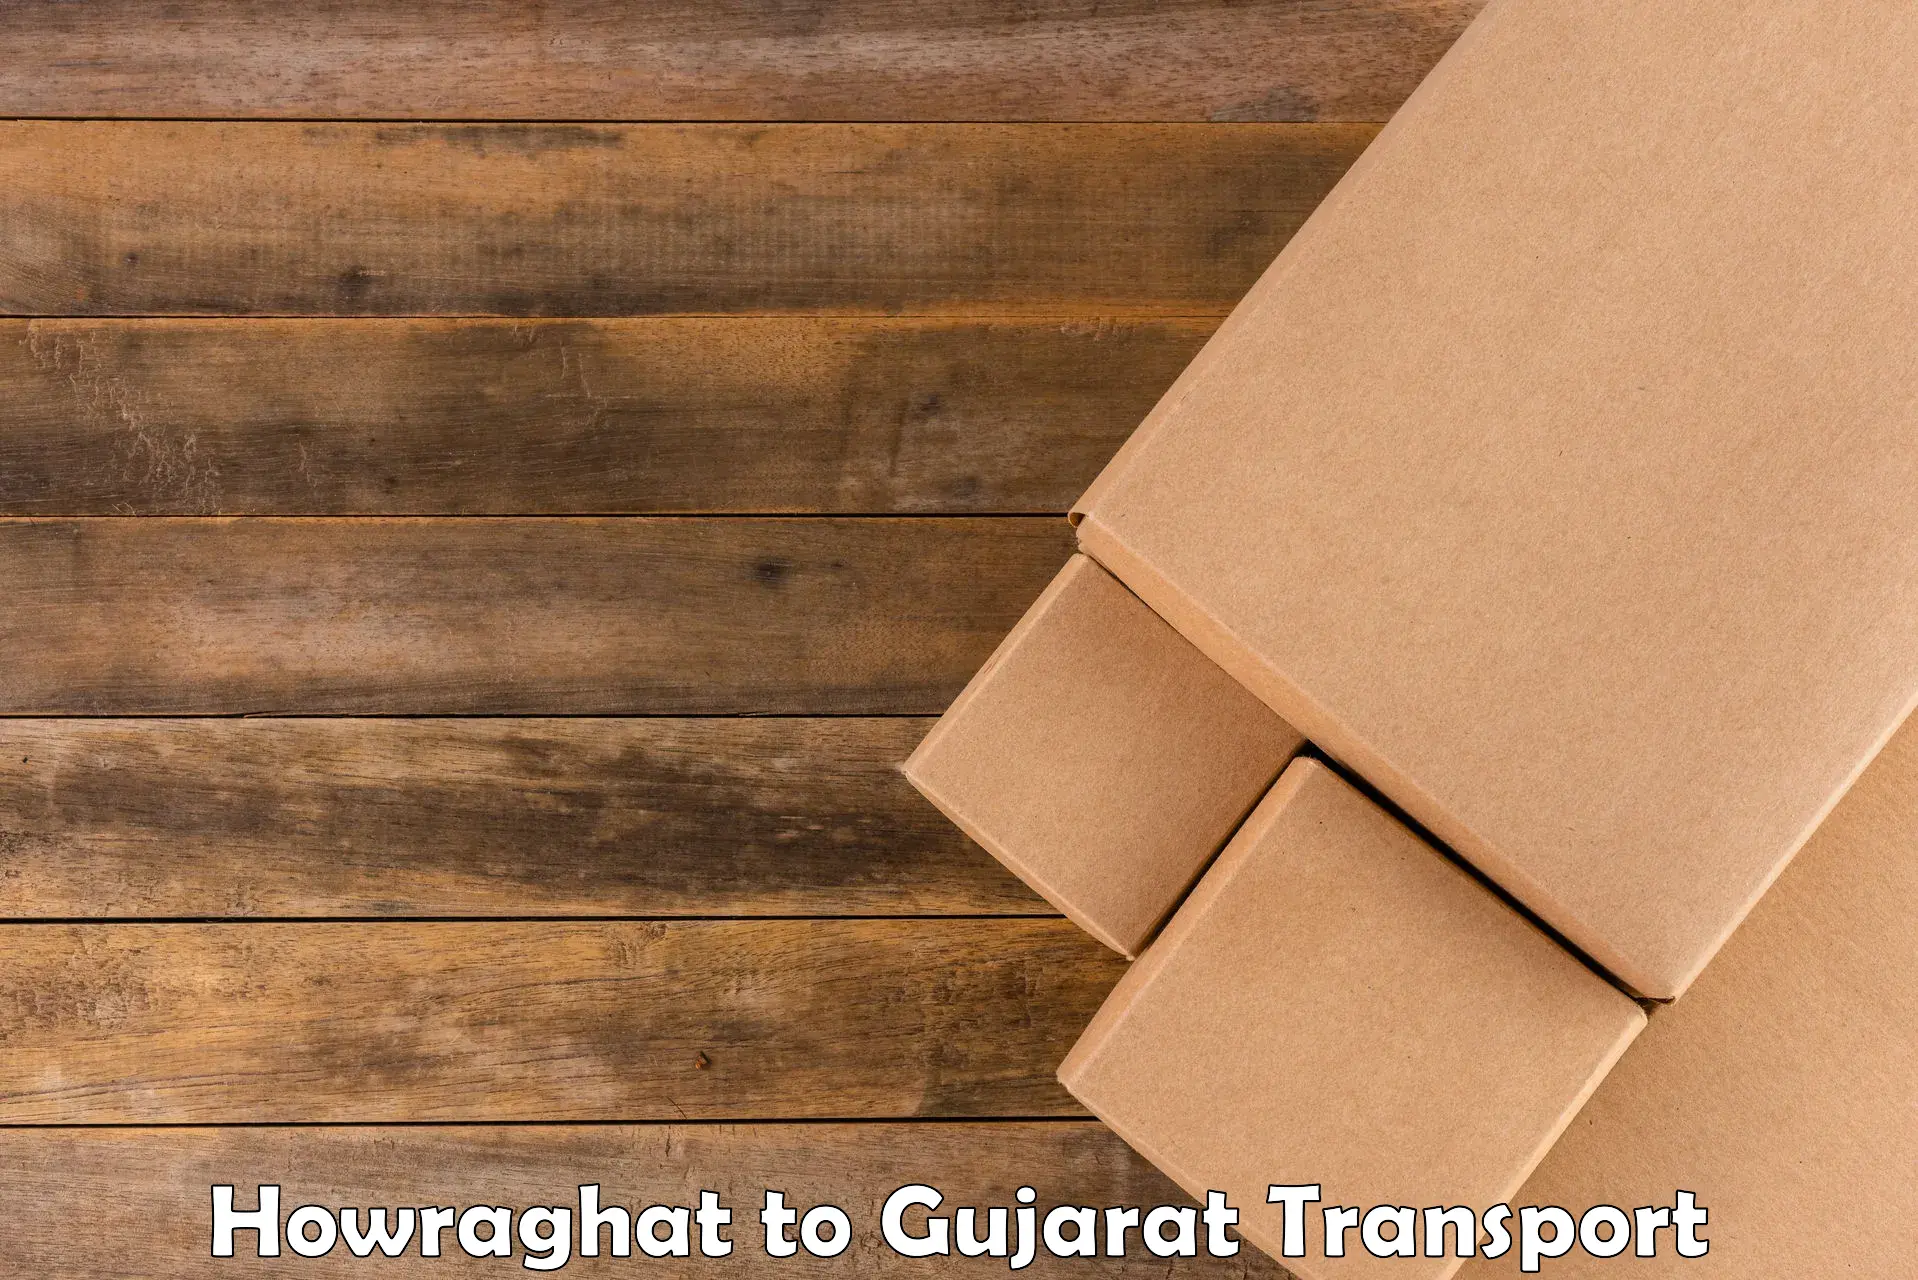 All India transport service Howraghat to GIDC